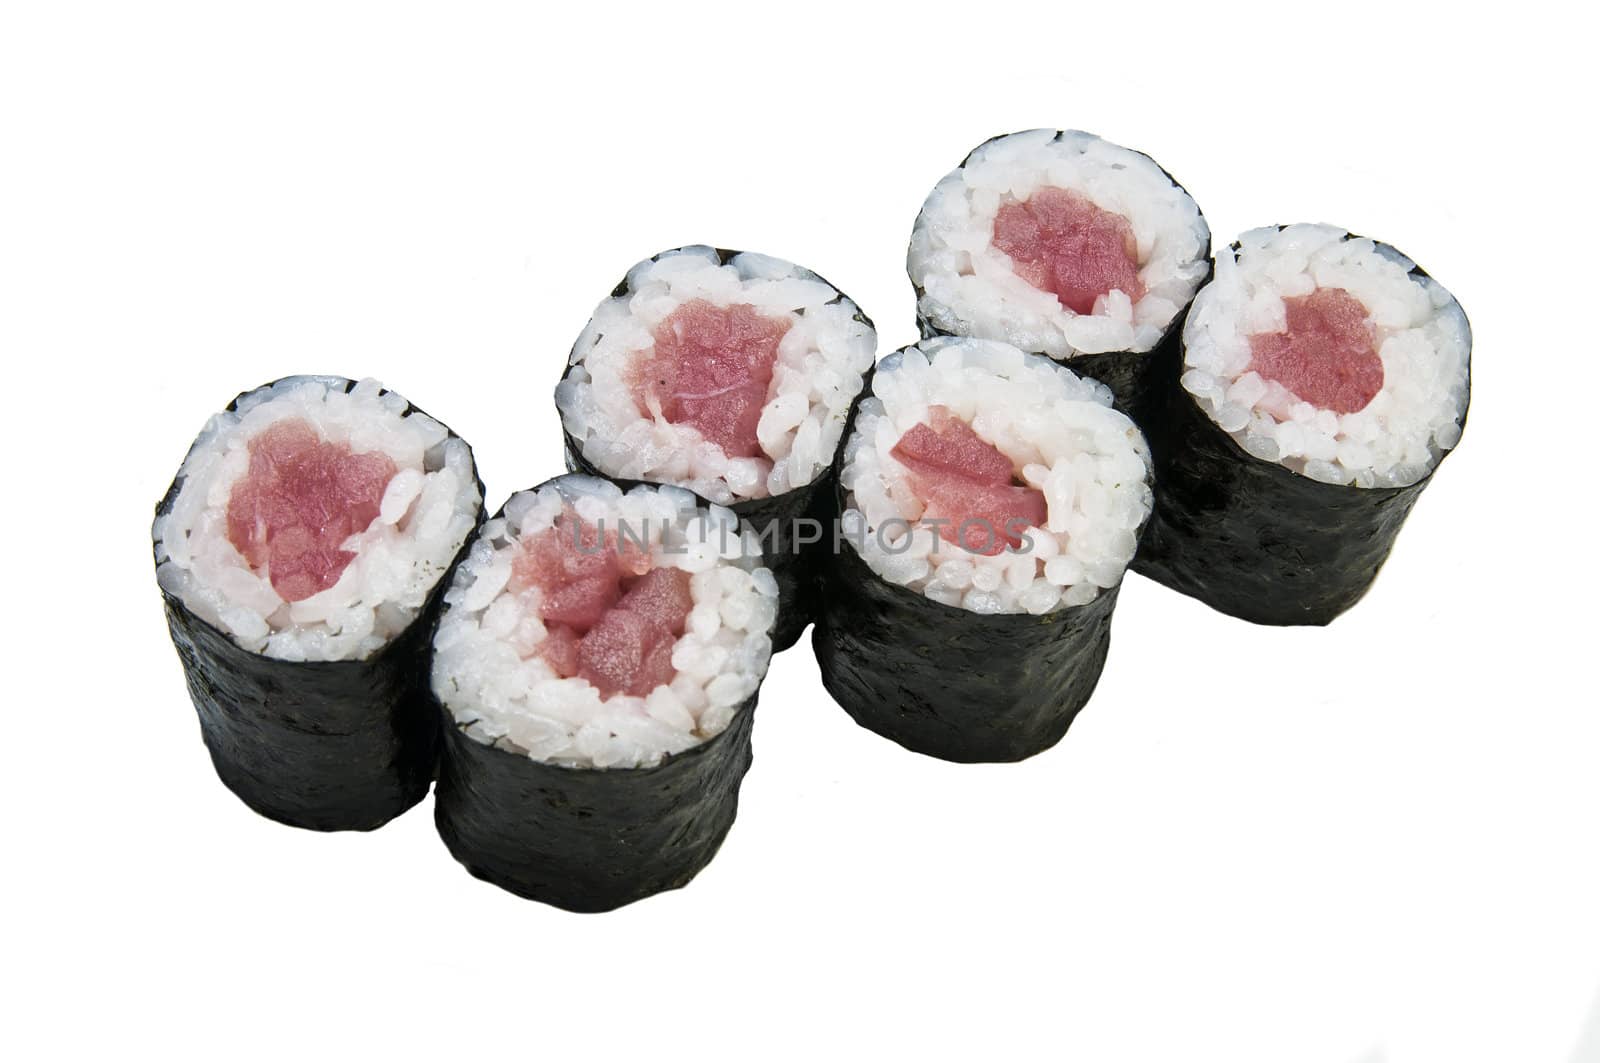 Japanese rolls by Lester120